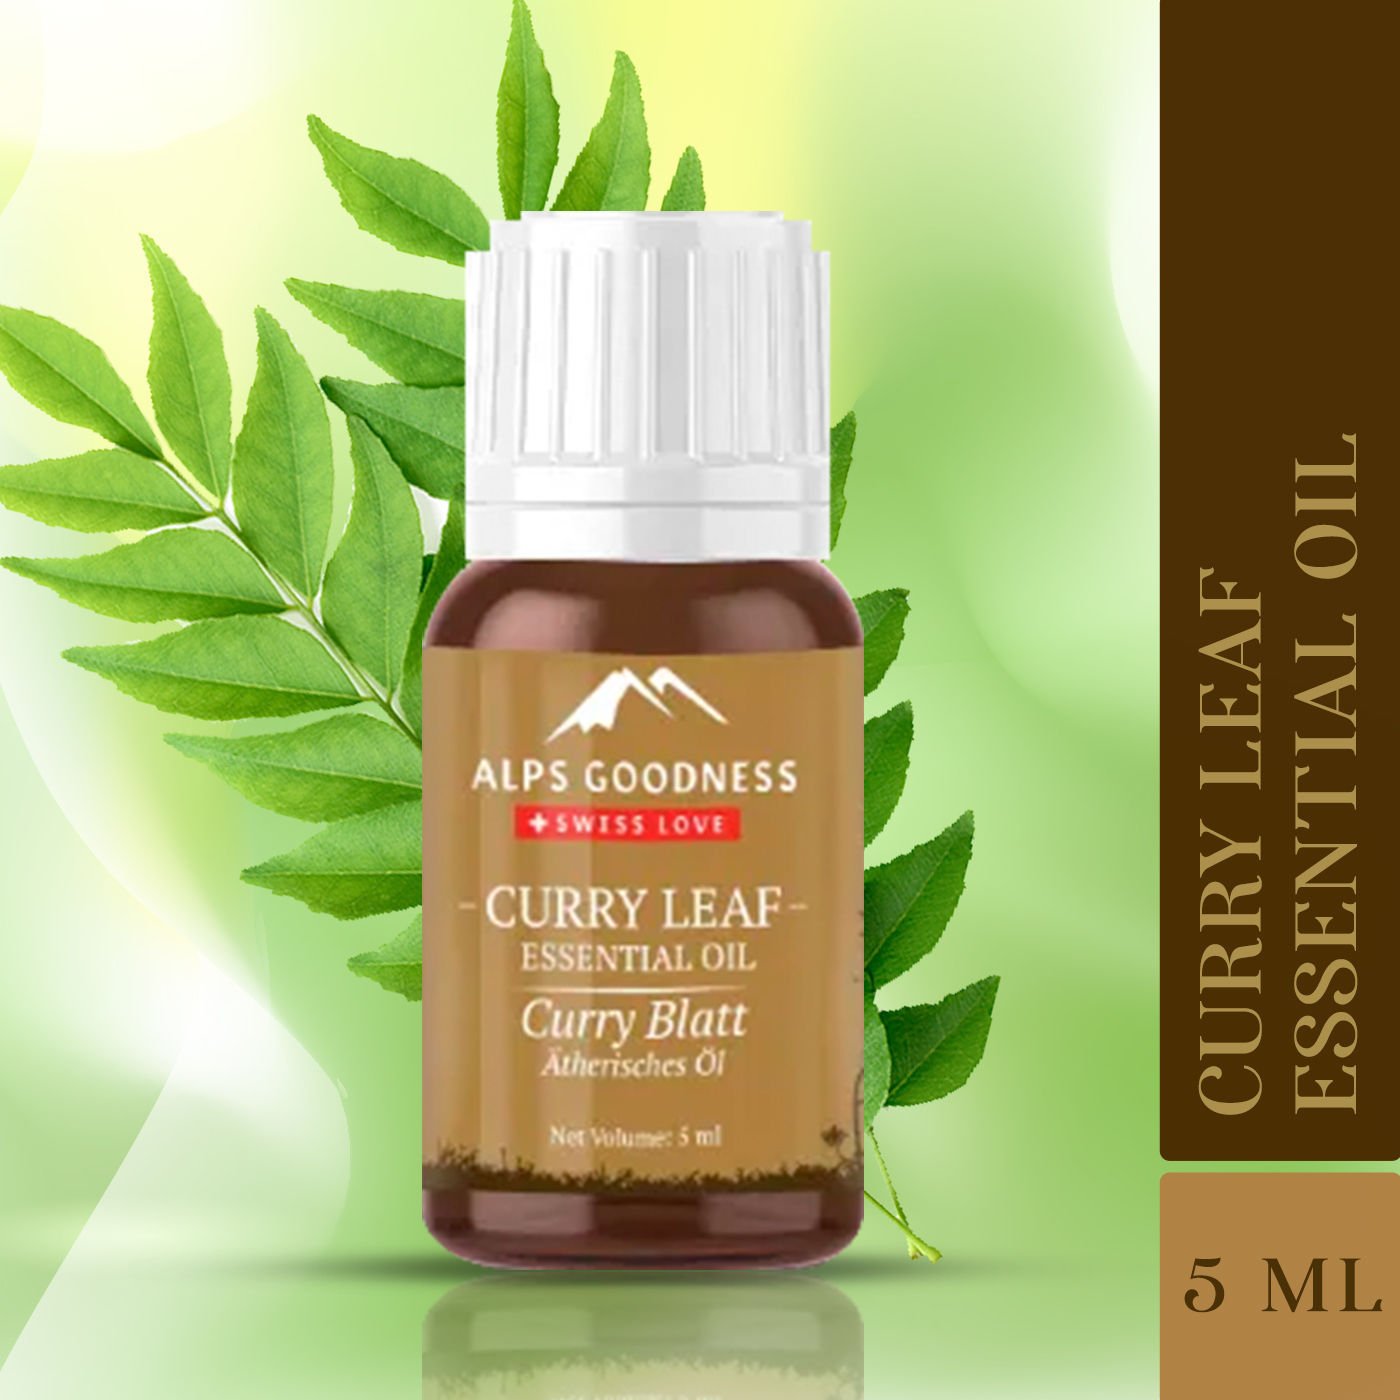 Buy Alps Goodness Essential Oil - Curry Leaf (5 ml) - Purplle